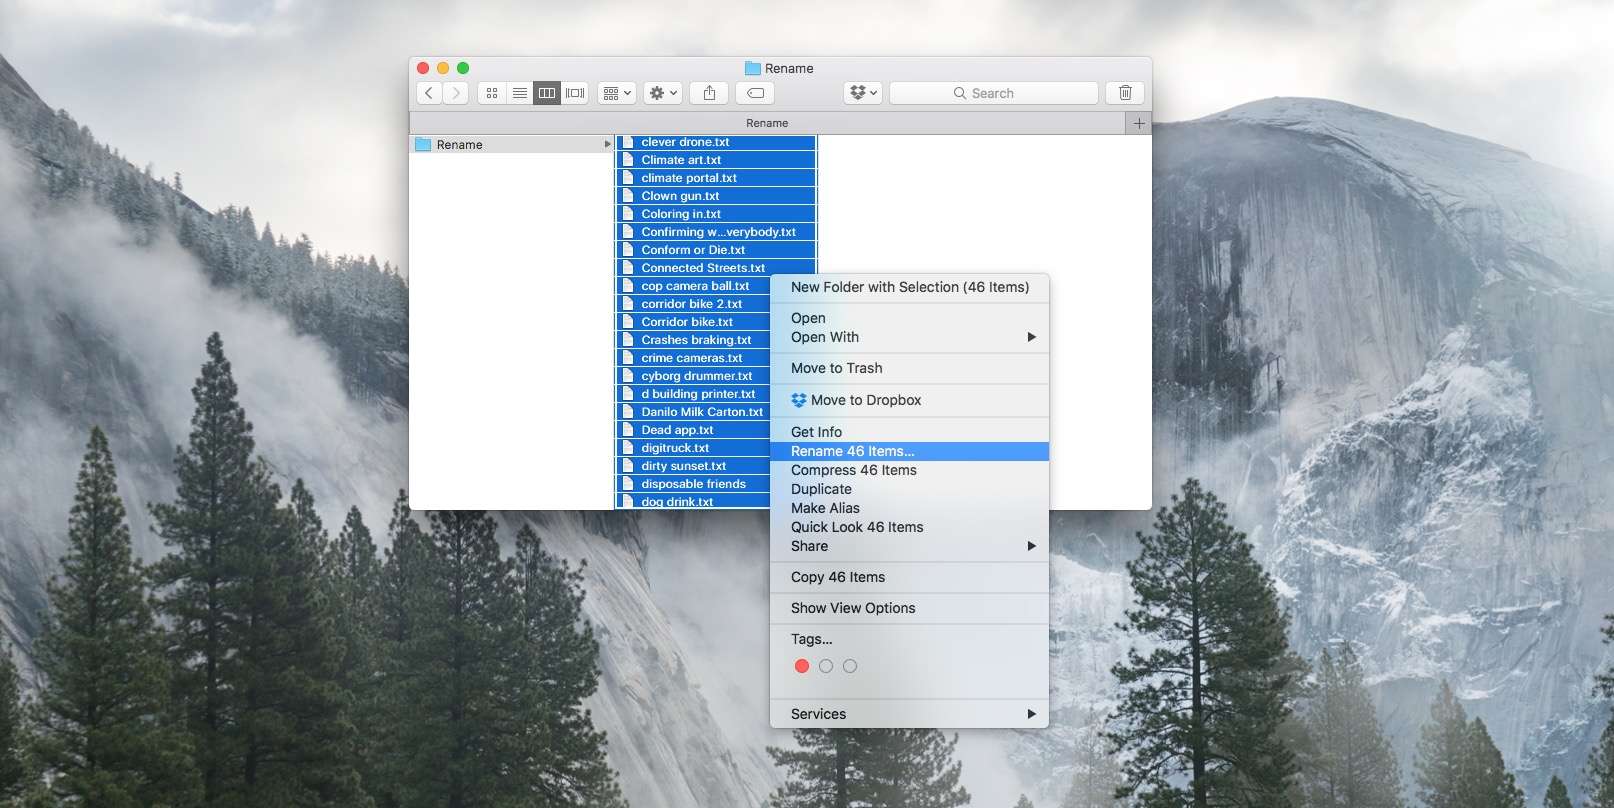 Pick the Rename option in the Finder's contextual menu.